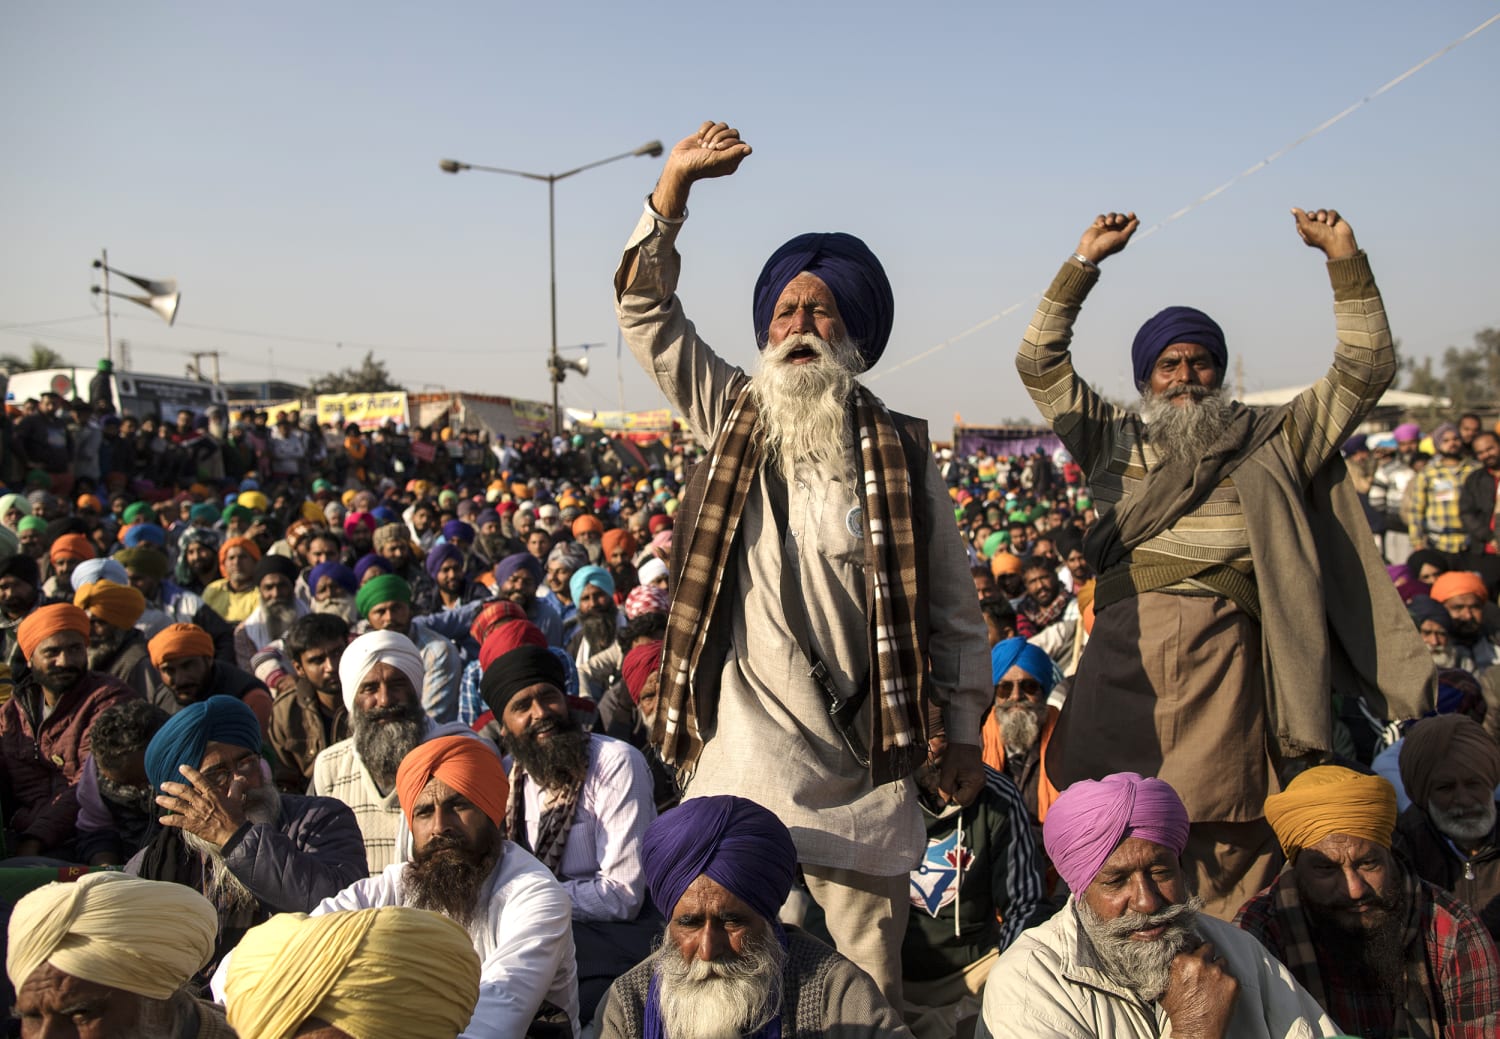 India's farmers are protesting authoritarianism disguised as capitalism. Sound familiar?